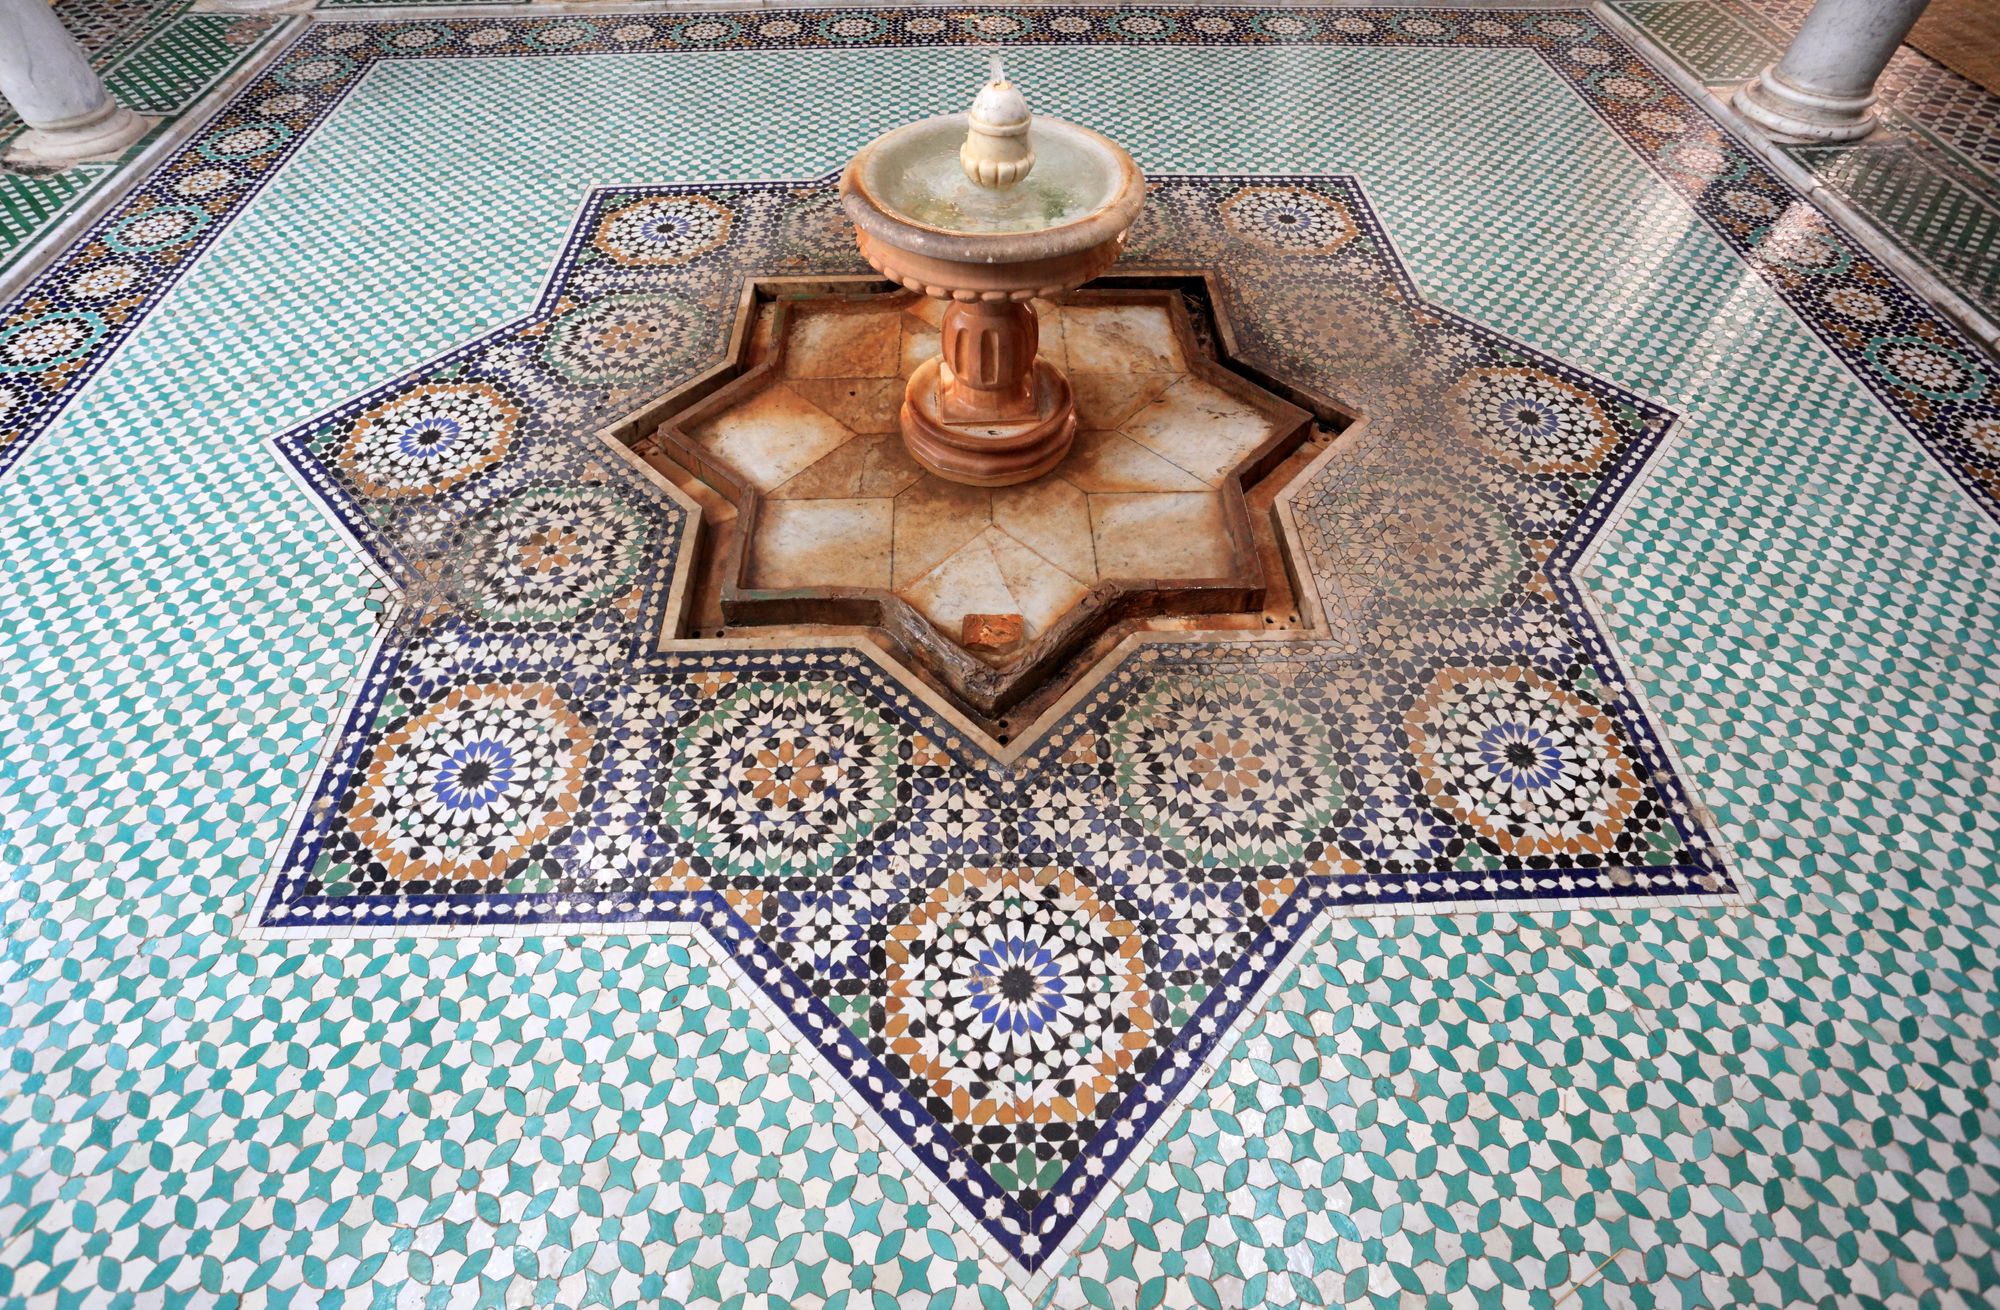 Example of art in the Mausoleum of Moulay Idriss